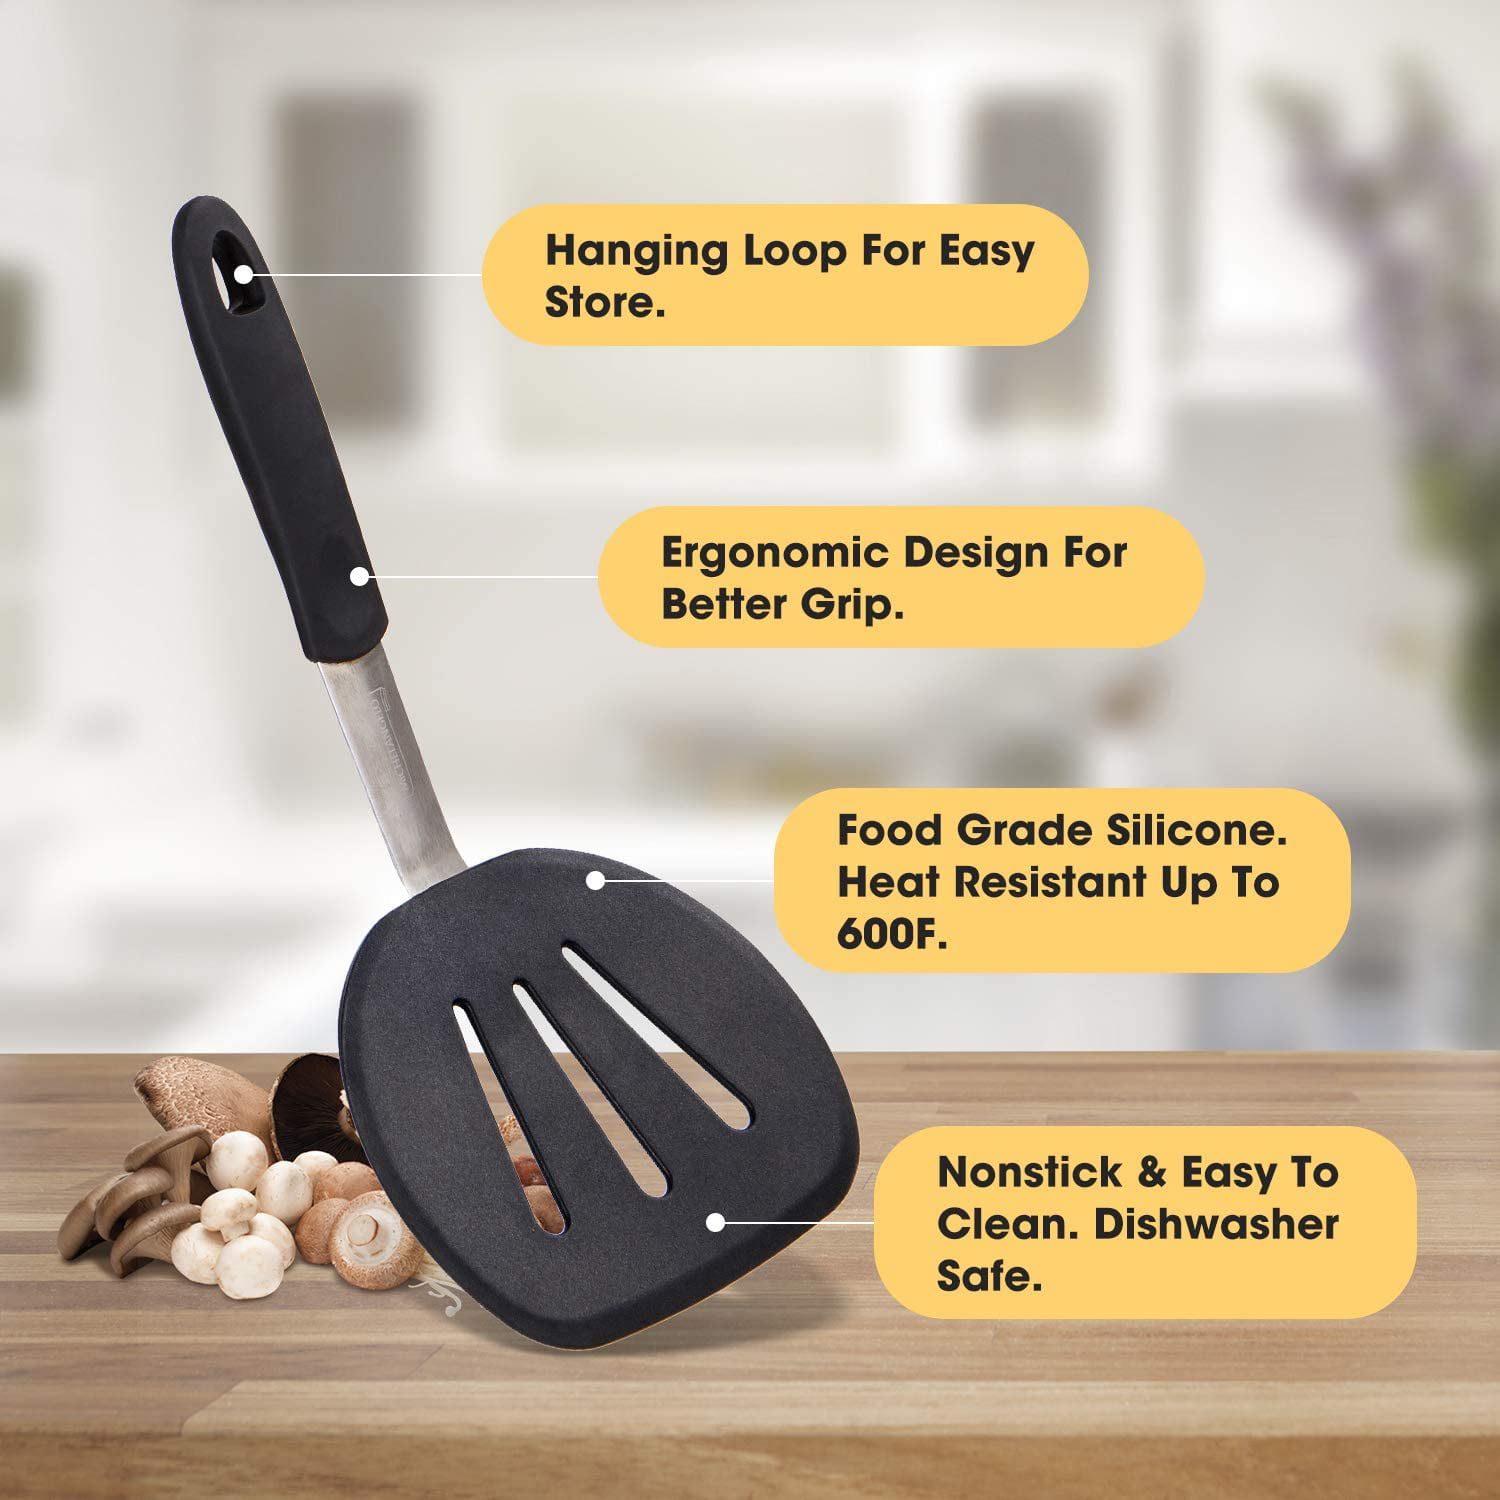 Silicone Spatula Turner Set with Lengthened Handle, Heat Resistant Spatulas  for Nonstick Cookware, K…See more Silicone Spatula Turner Set with